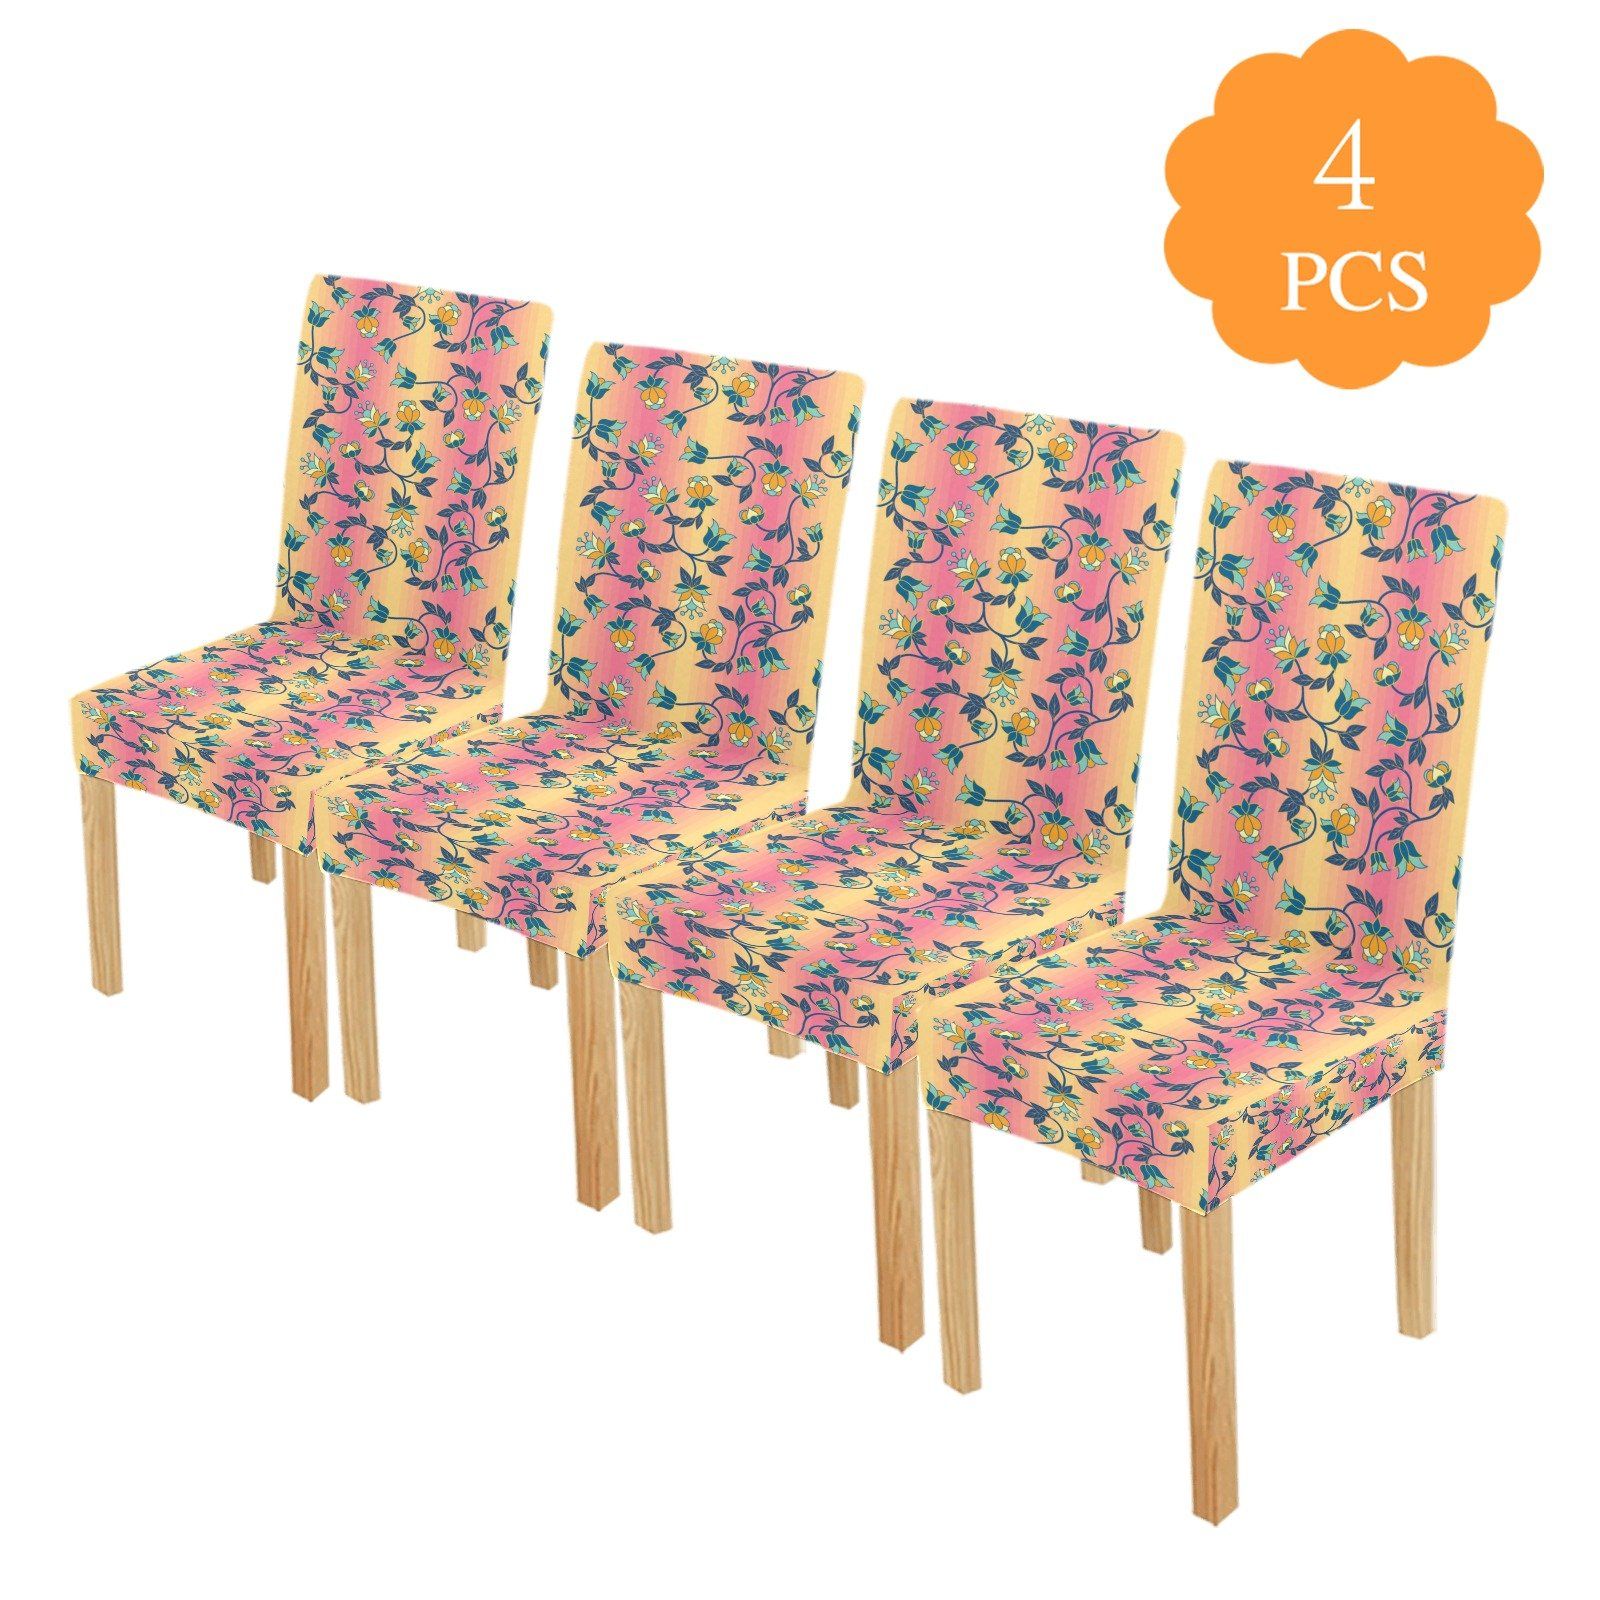 Orange Days Chair Cover (Pack of 4) Chair Cover (Pack of 4) e-joyer 